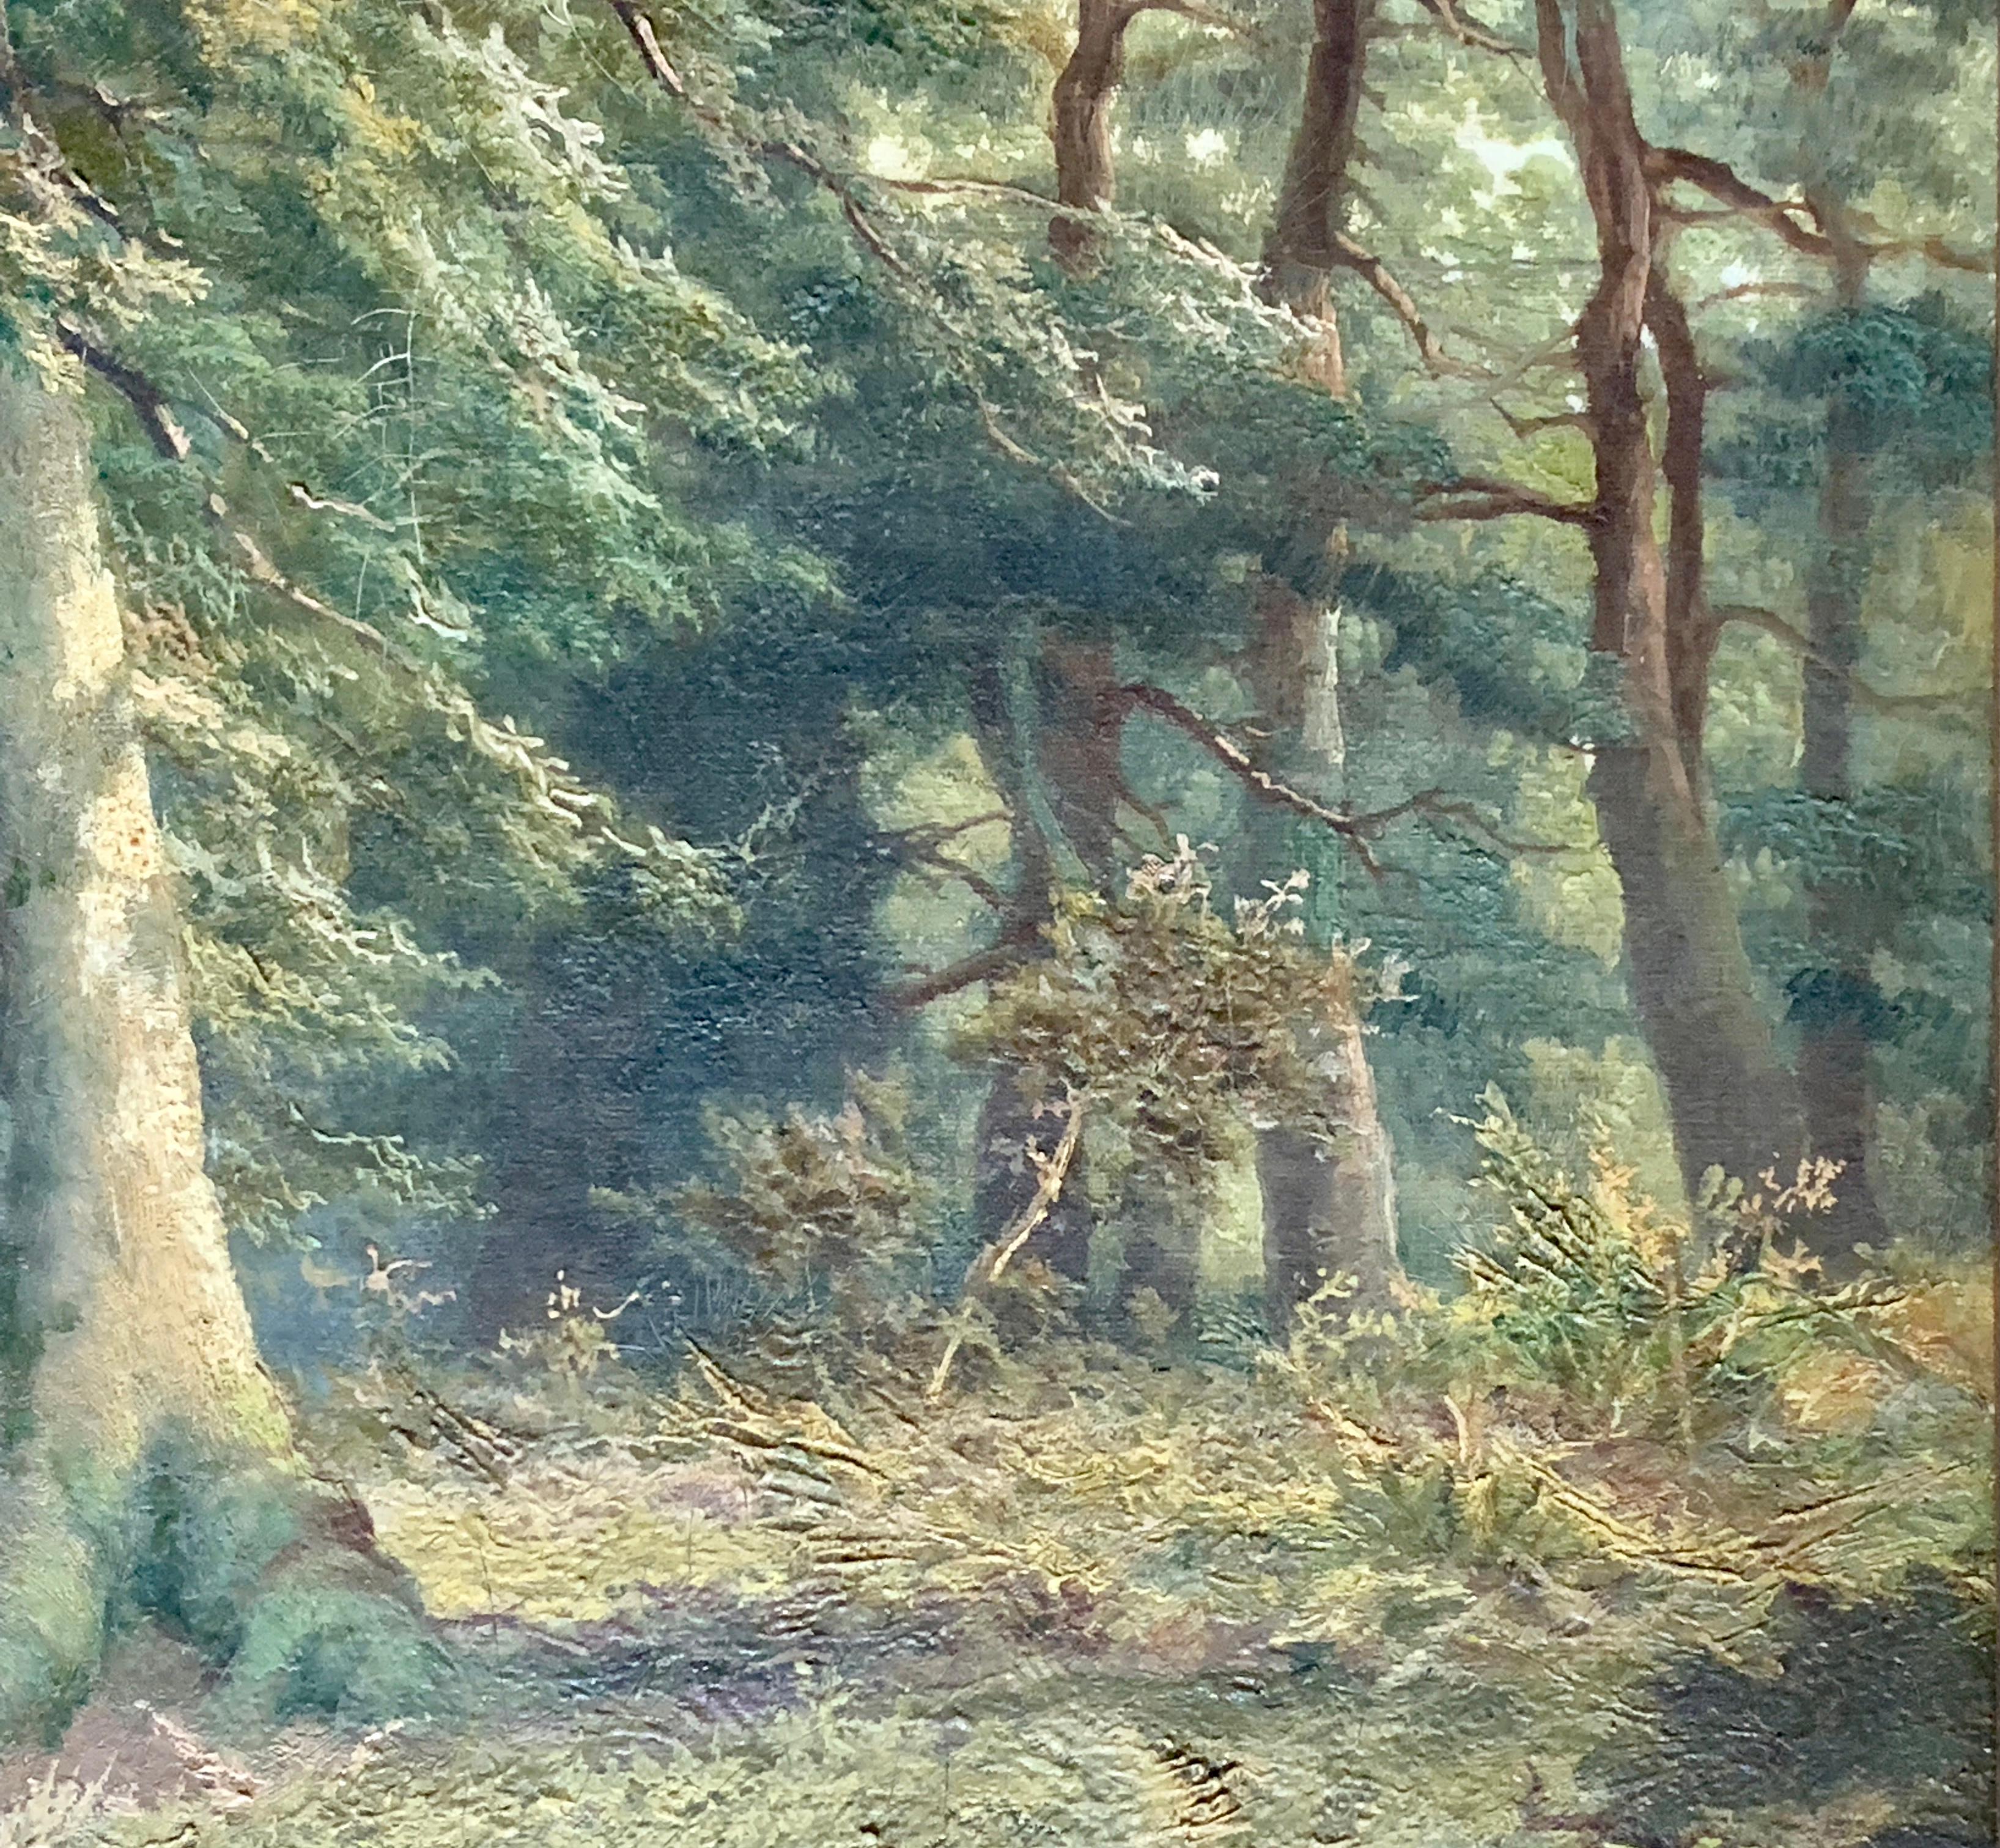 English landscape painter from the 1870's who exhibited at the Royal Academy and the British Institute in London.

He mostly painted in watercolors and this example would have been possibly painted for an exhibition or a wealthy client.
The piece is